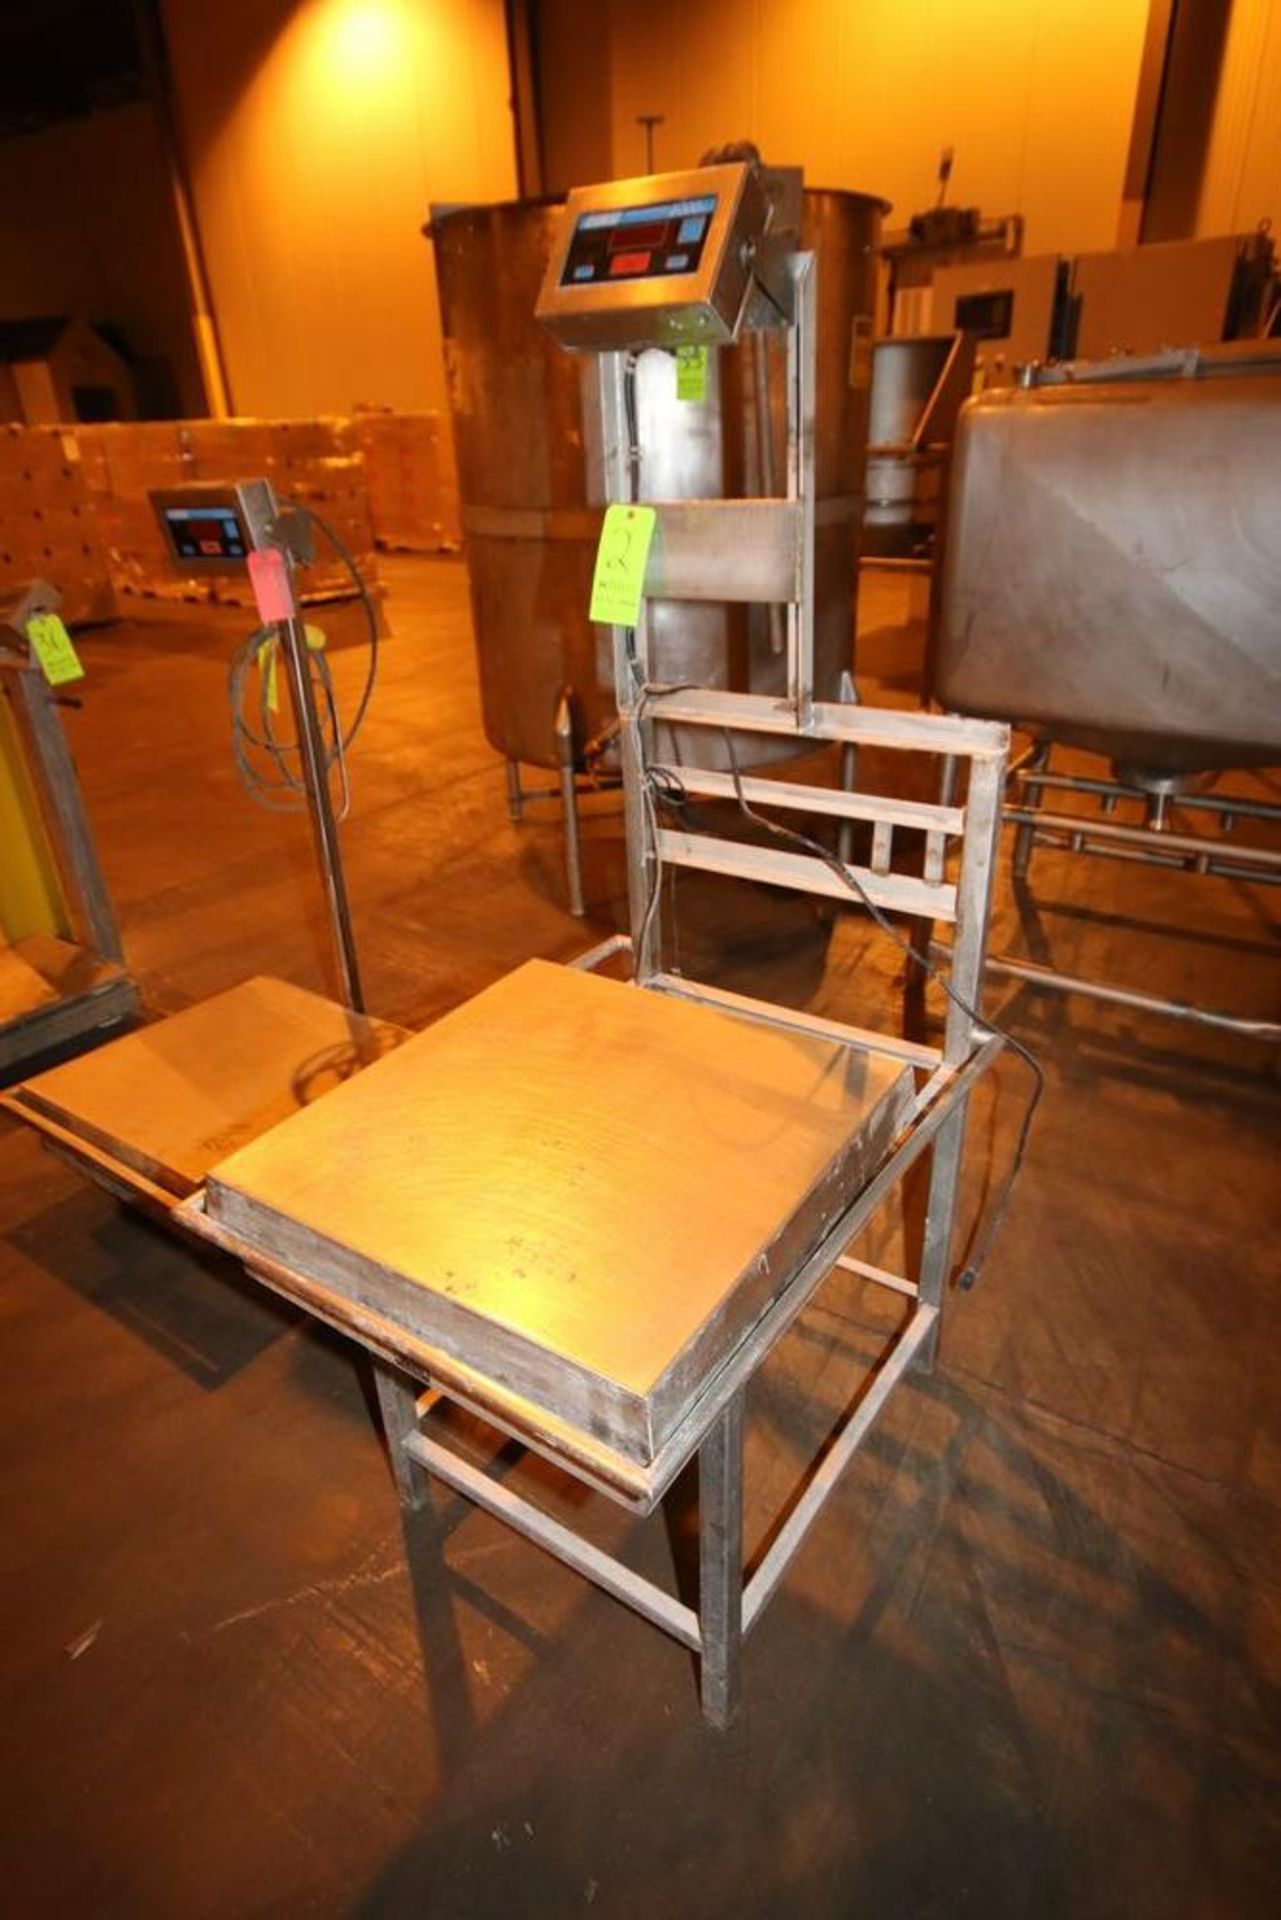 Doran S/S Platform Scale, M/N 8000 XL, with Digitial Read Out, Aprox. 24" x 24" S/S Platform, - Image 2 of 2